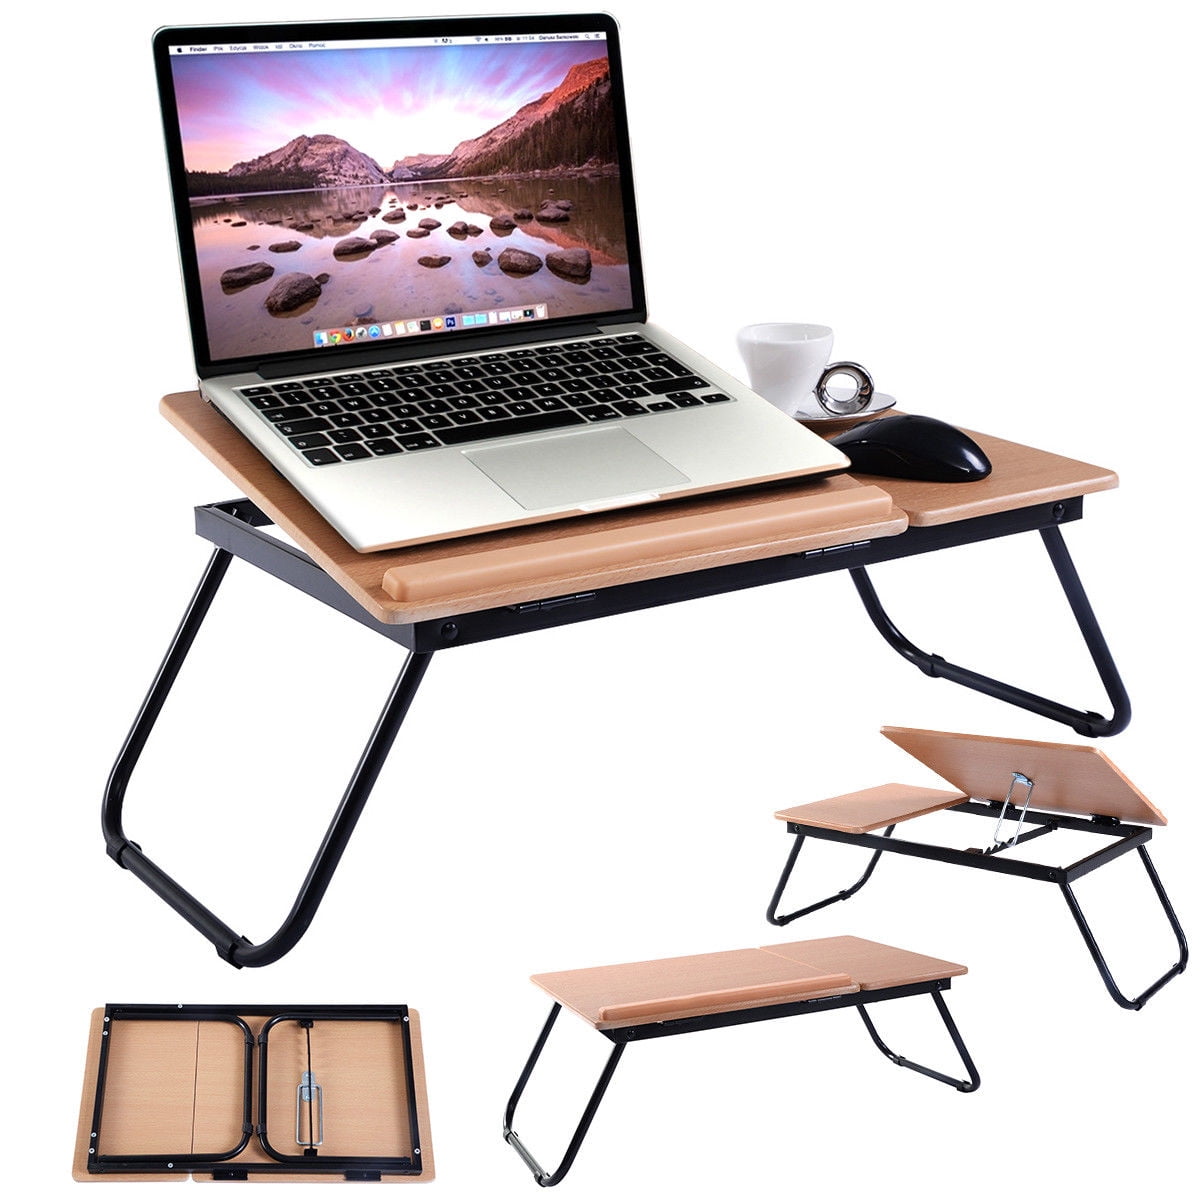 Gymax Foldable Laptop Notebook PC Desk Table Adjustable ...